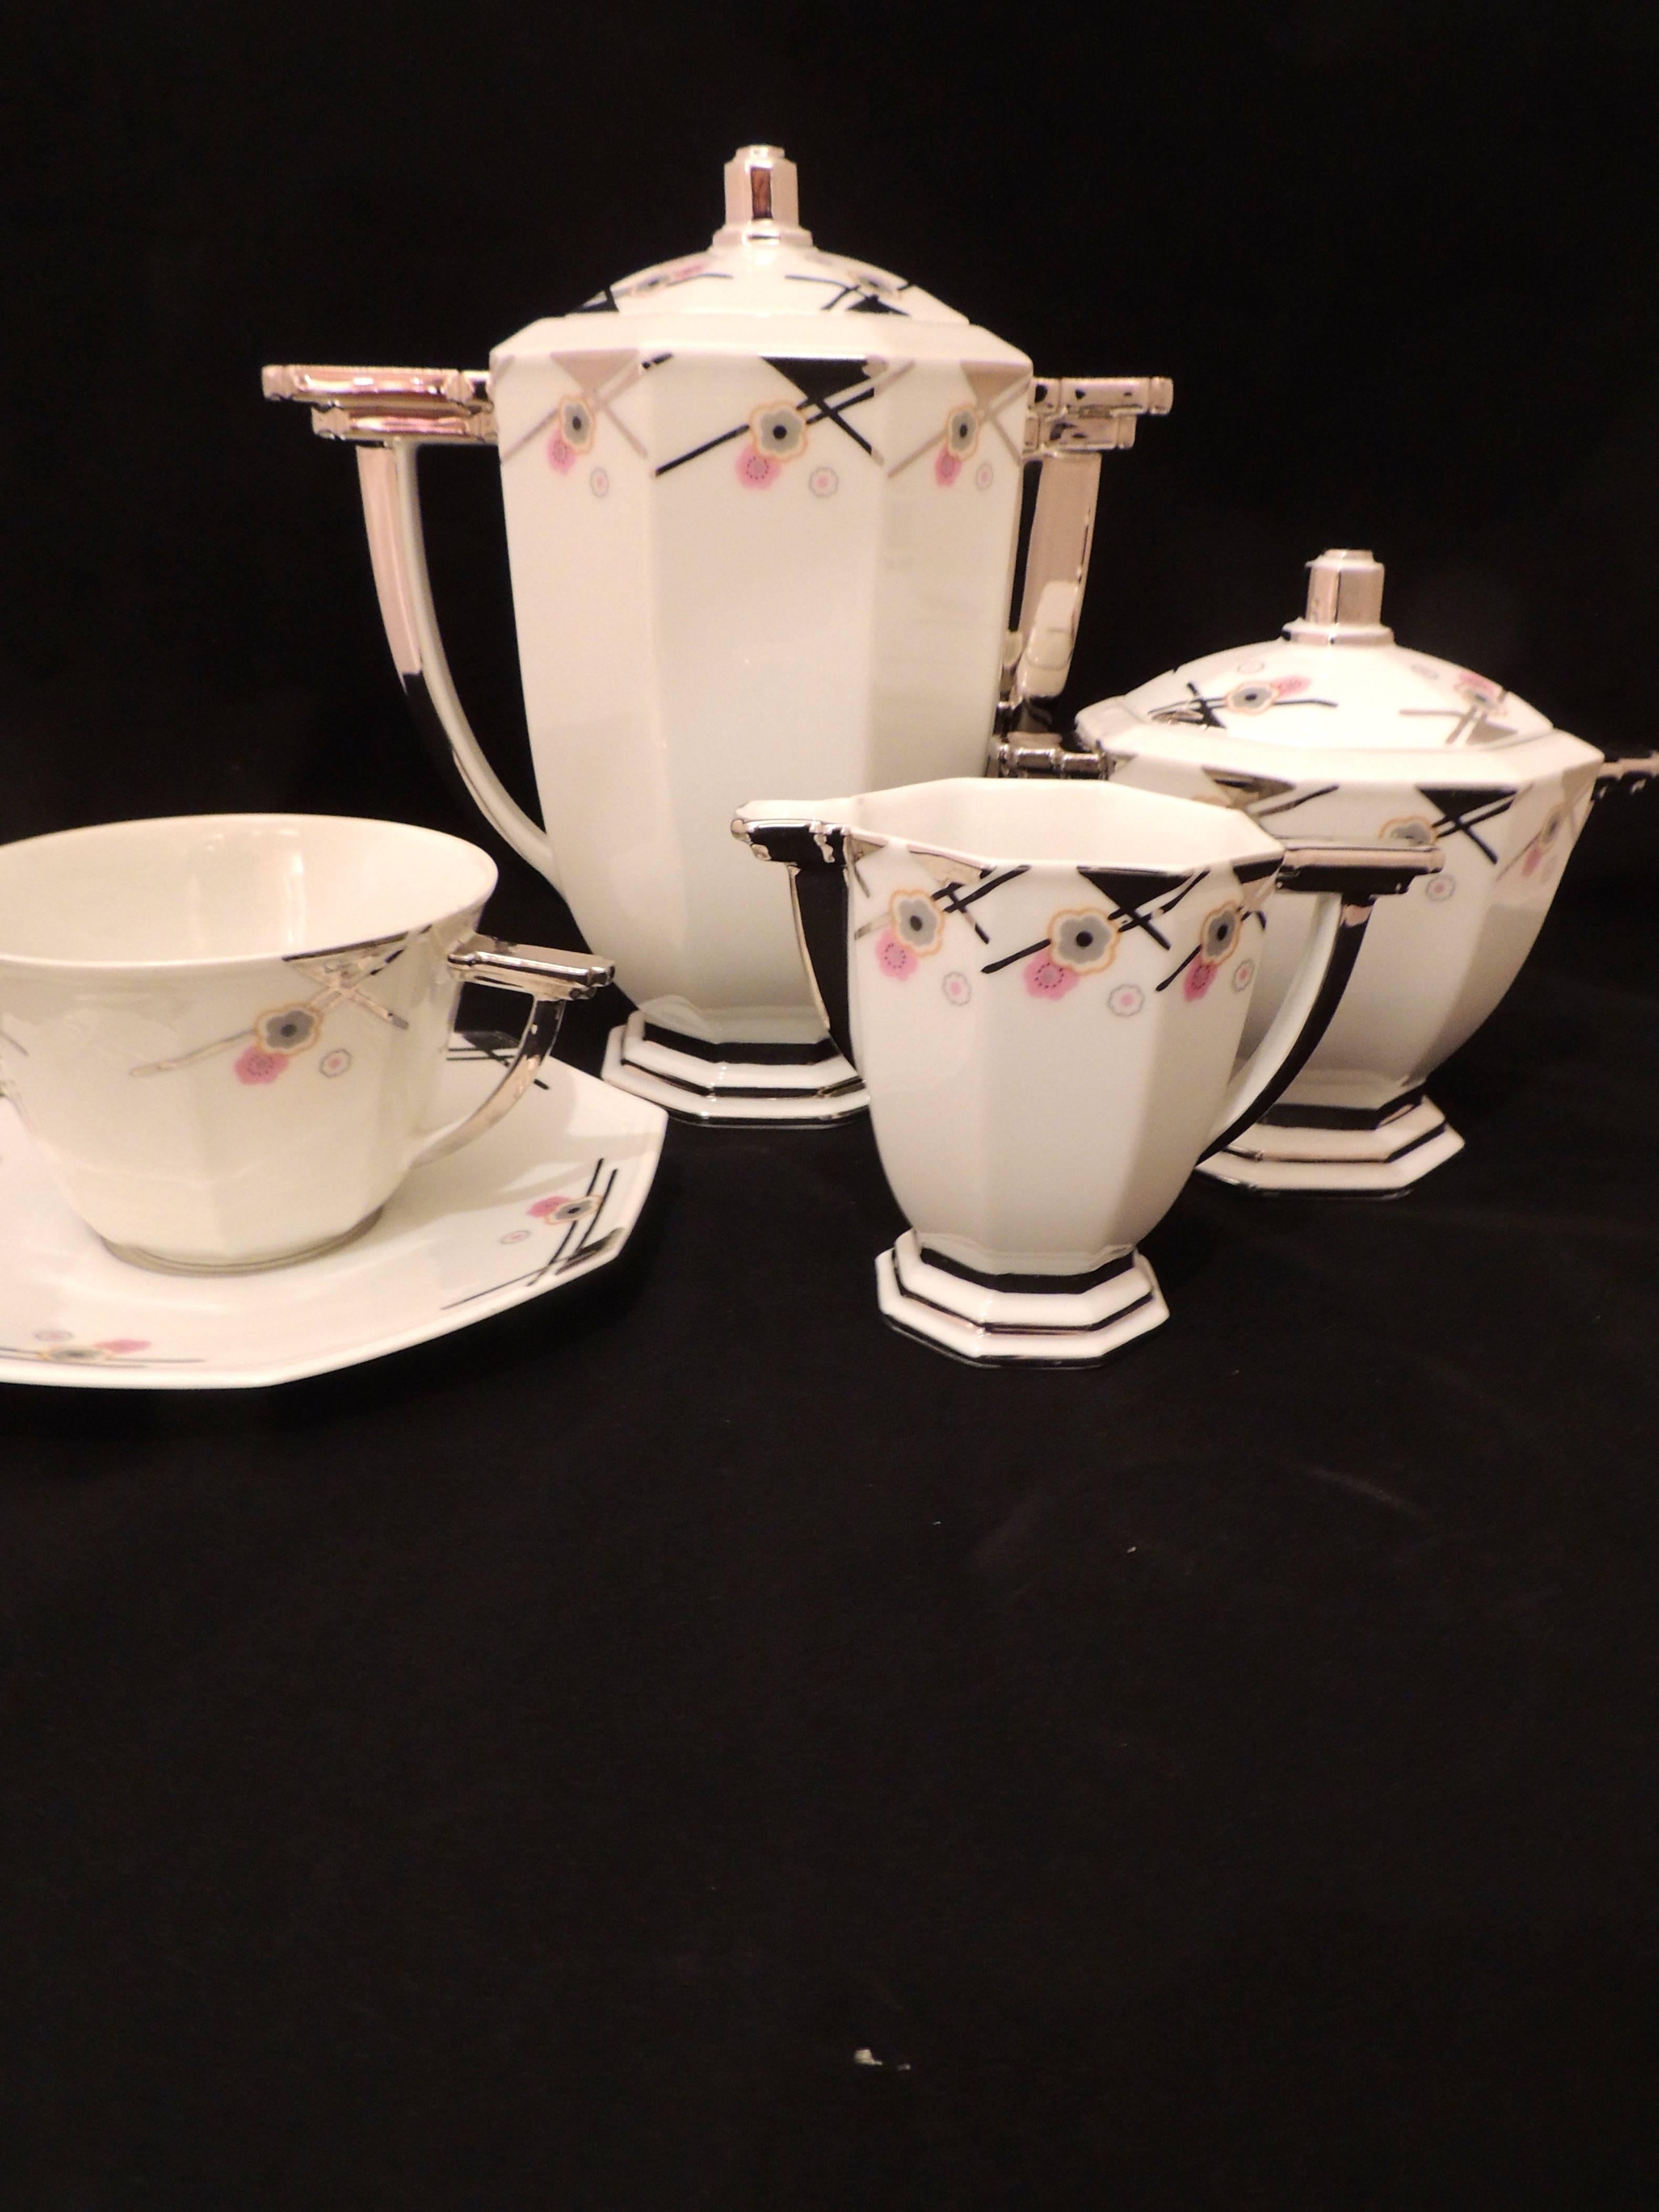 Complete and completely fabulous Art Deco coffee, tea or chocolate set made in France by TLB Limoges: creator of finest china in romantic and modernist designs.

The set consists of:

Large pot

Creamer and sugar

Six oversized cups and